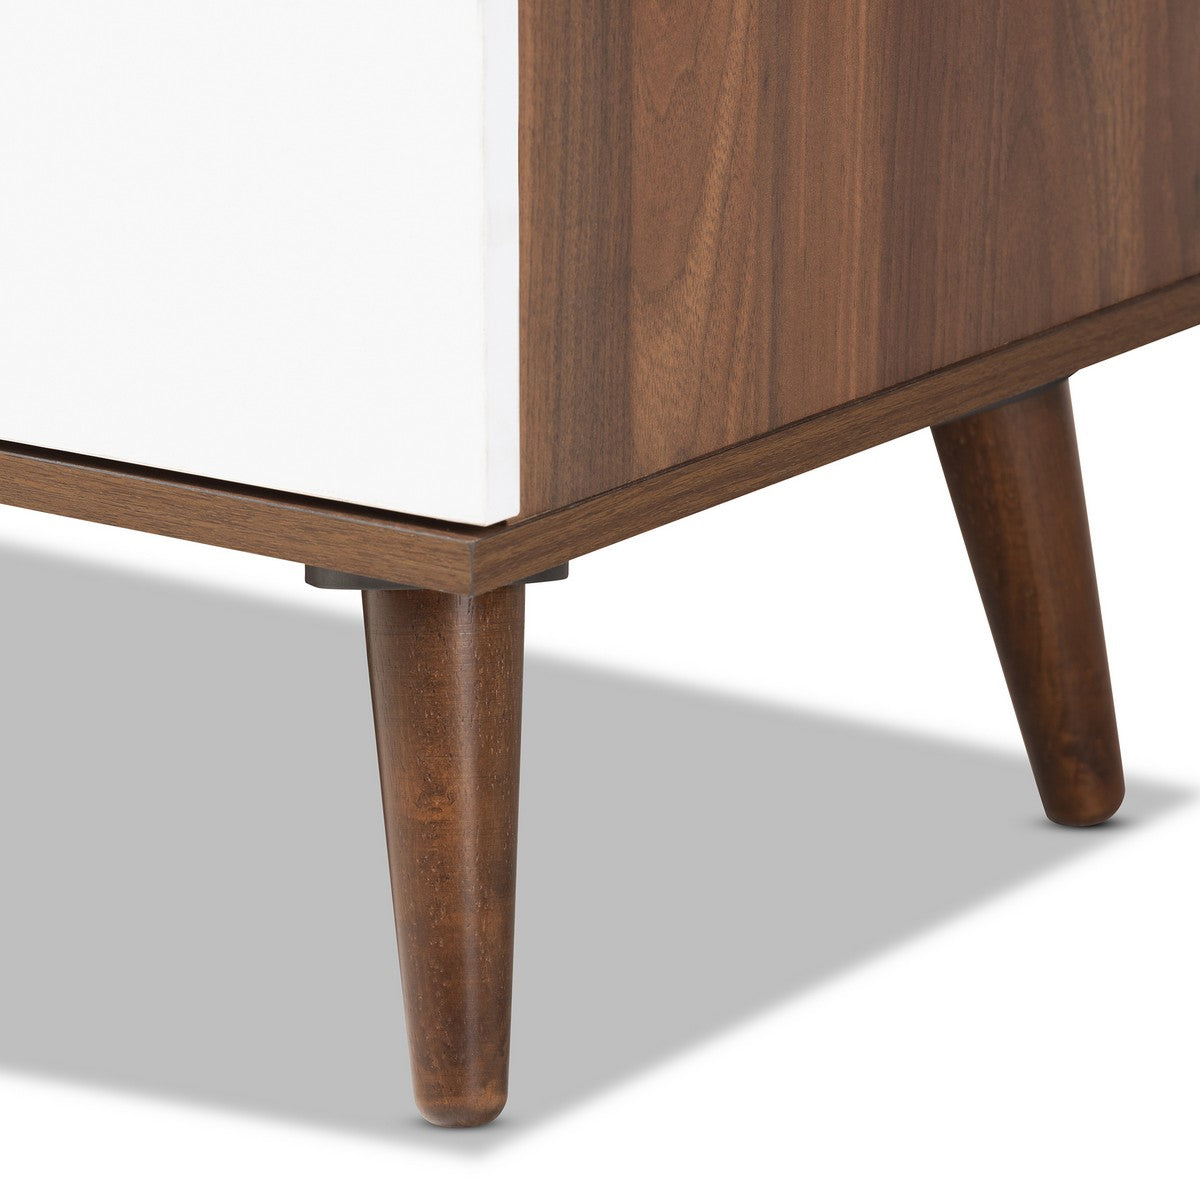 Baxton Studio Quinn Mid-Century Modern Two-Tone White and Walnut Finished 2-Door Wood Dining Room Sideboard